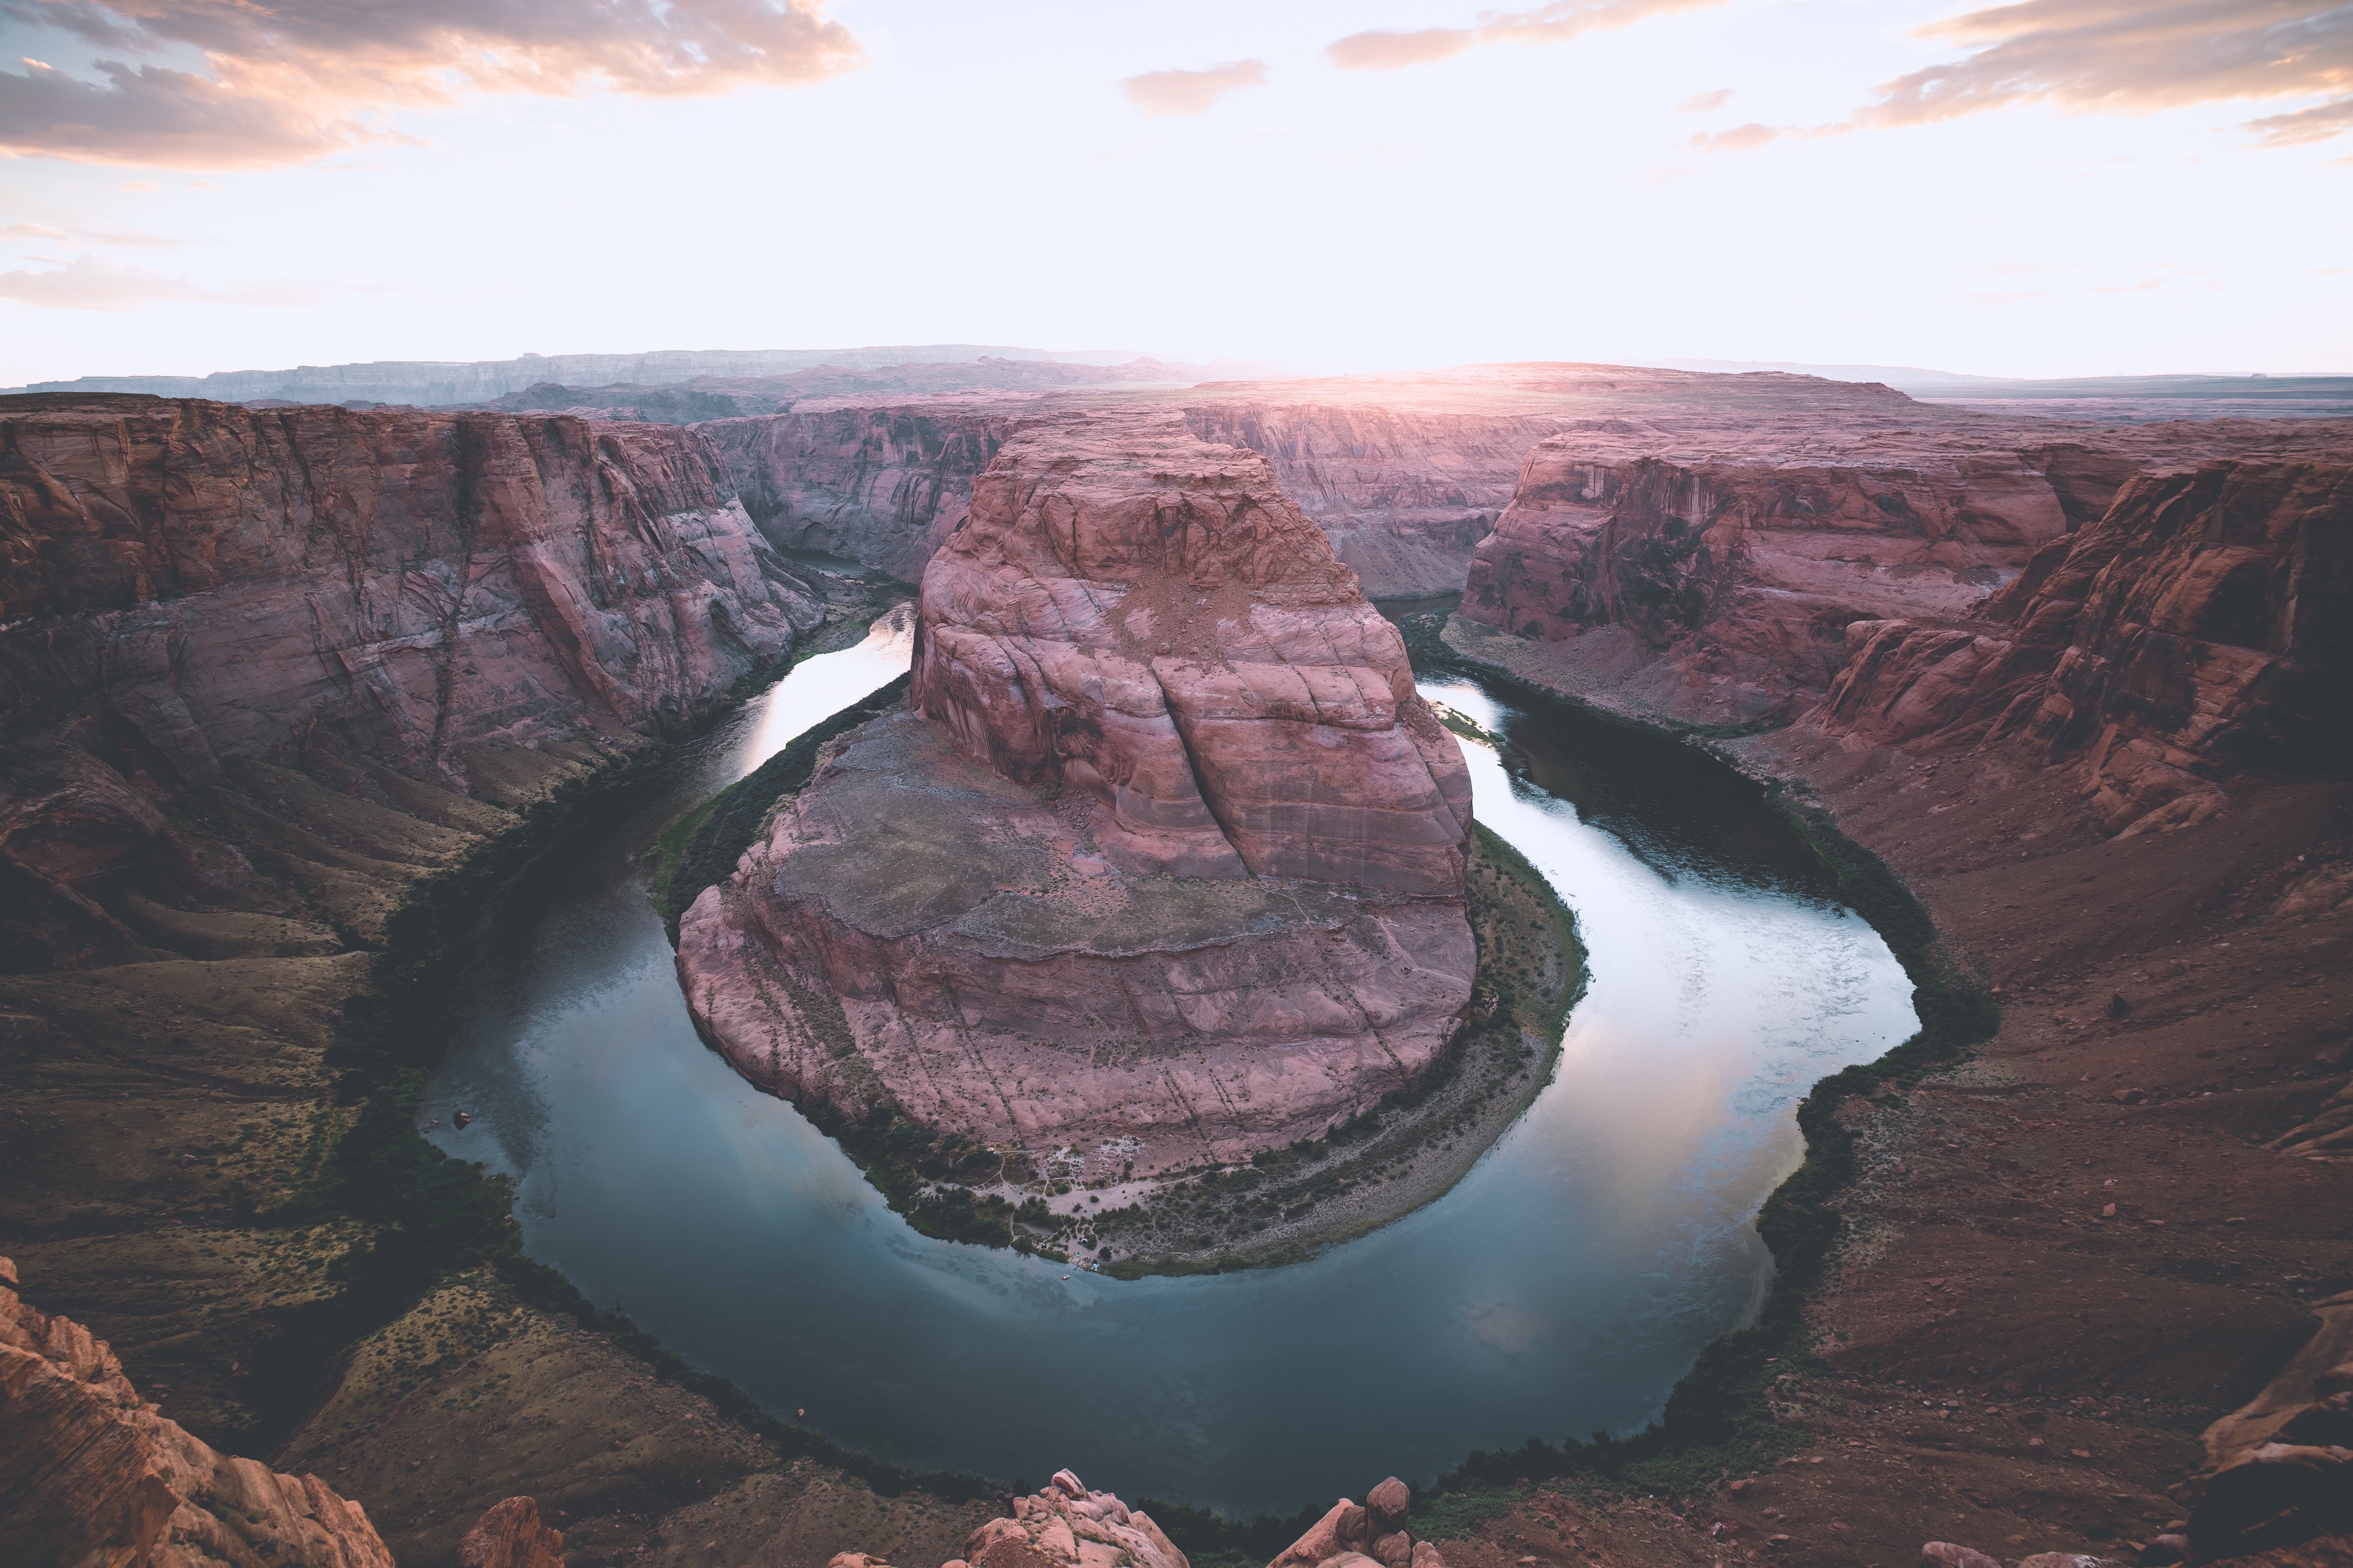 Wallpaper Weekends Horseshoe Bend For Mac iPad iPhone And Apple